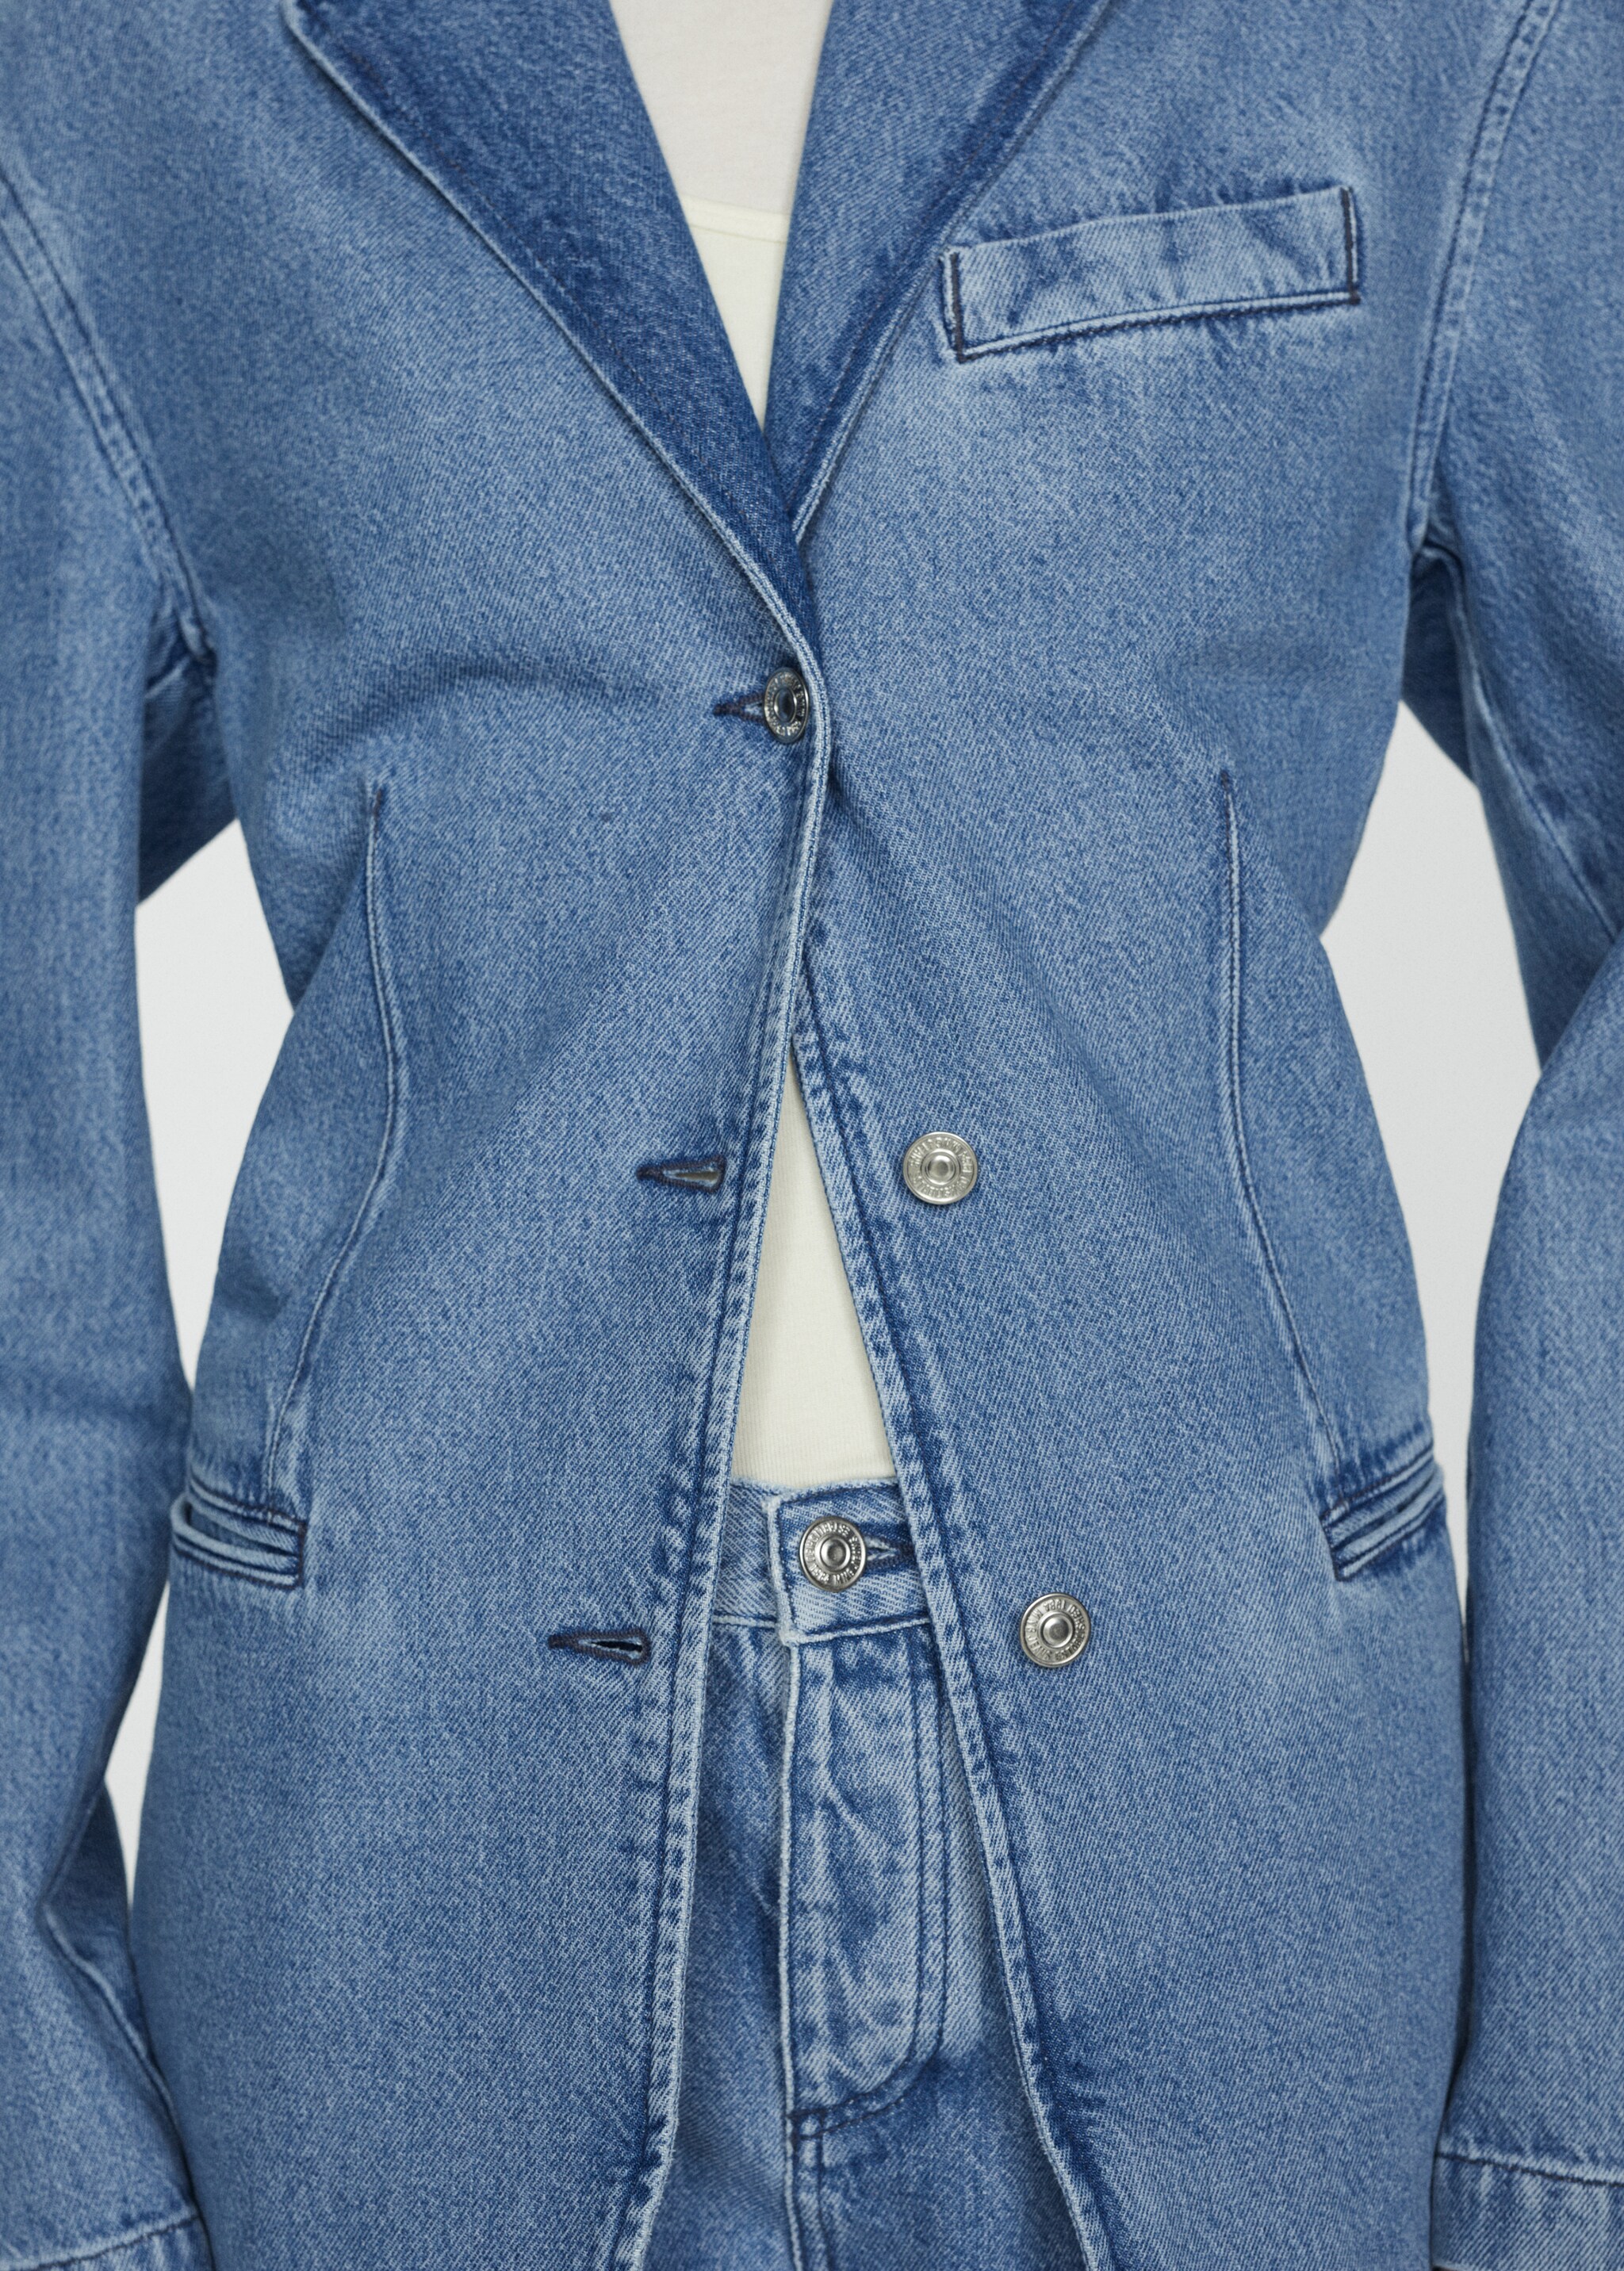 Denim jacket with buttons - Details of the article 6